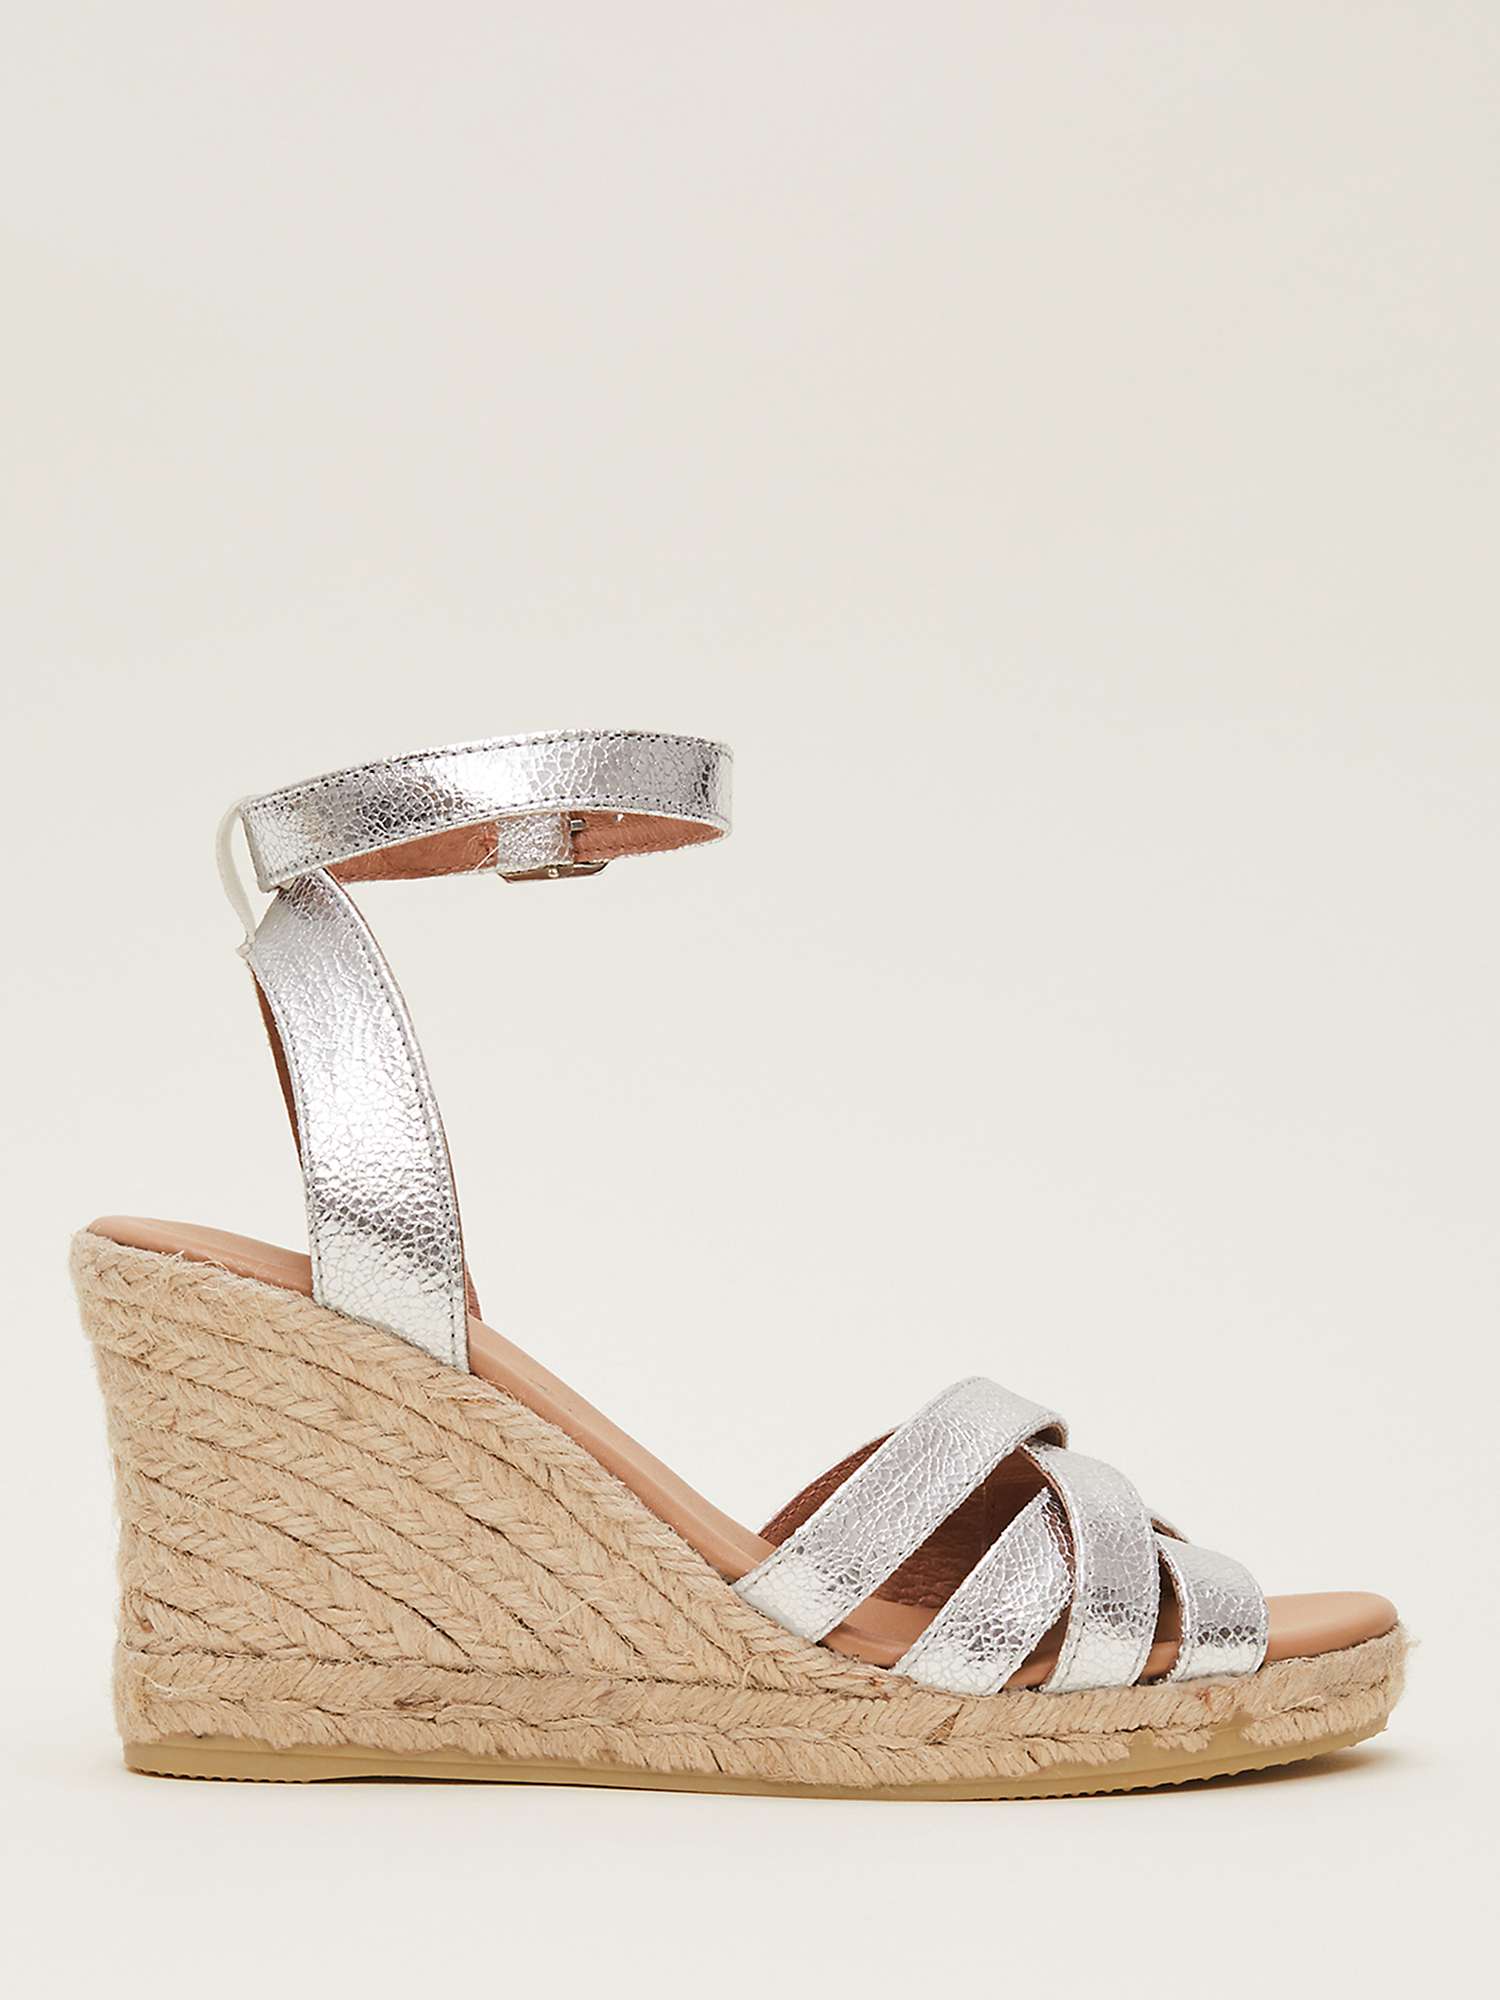 Buy Phase Eight Wedge Heel Strappy Espadrille Shoes, Silver Online at johnlewis.com